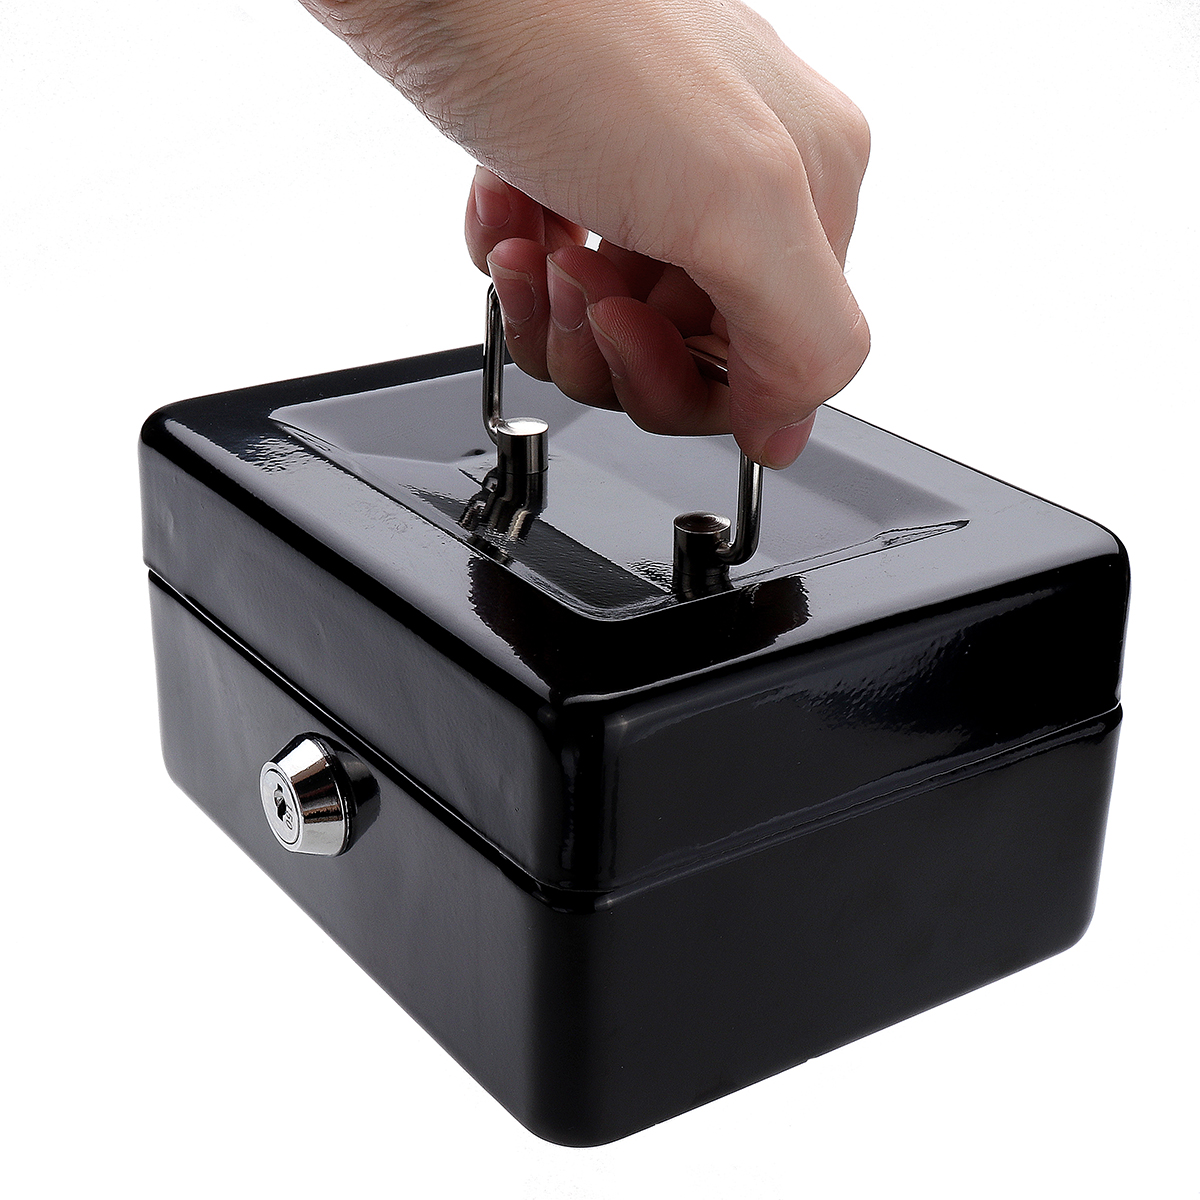 Mini-Portable-Money-Safe-Storage-Case-Black-Sturdy-Metal-With-Coin-Tray-Cash-Carry-Box-1346714